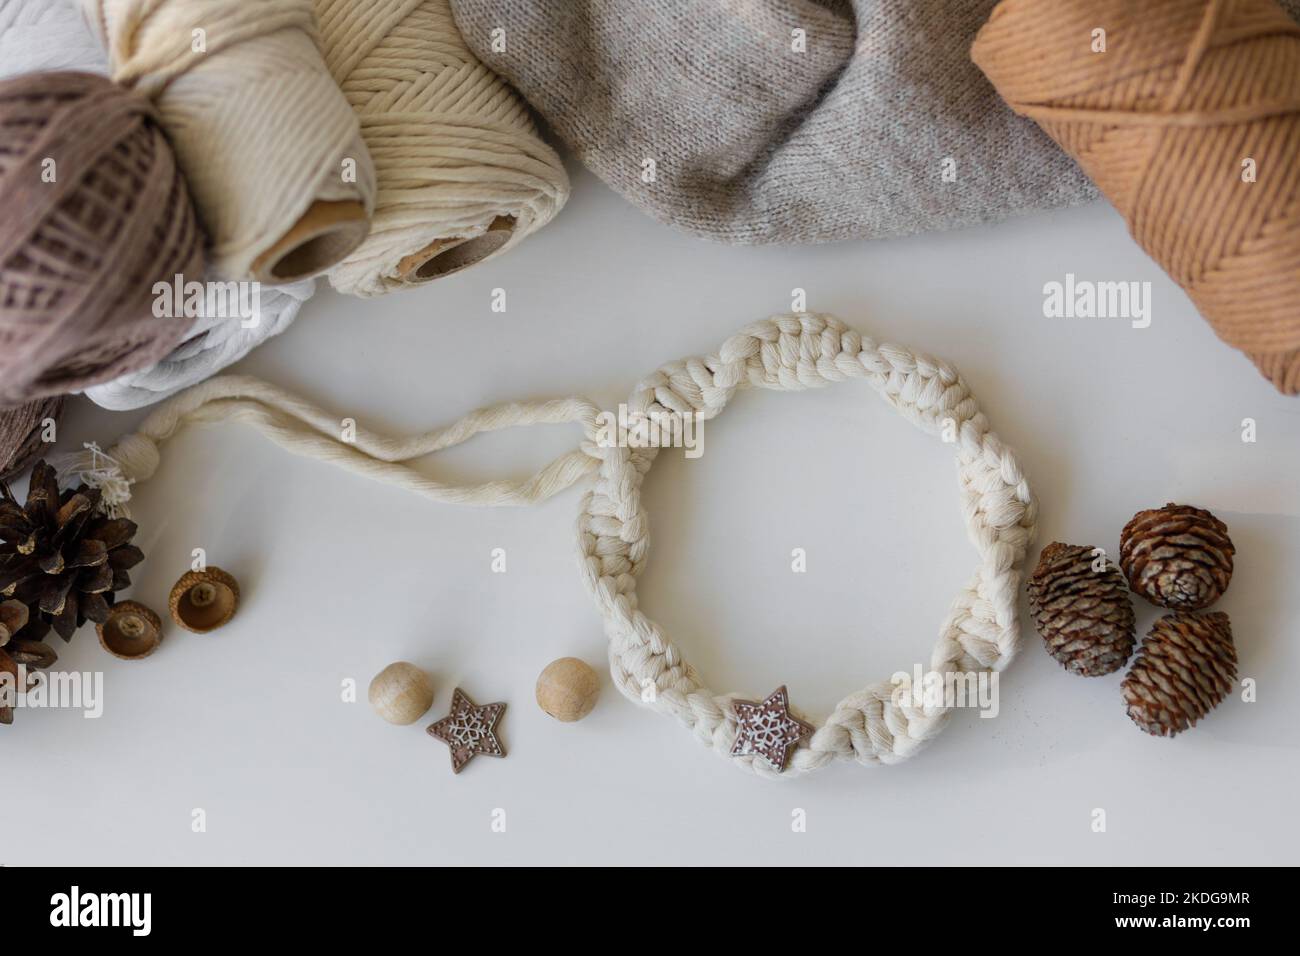 Winter table decor. White macrame wreath, cones, balls of thread and gray knitted sweater on white table. Stock Photo